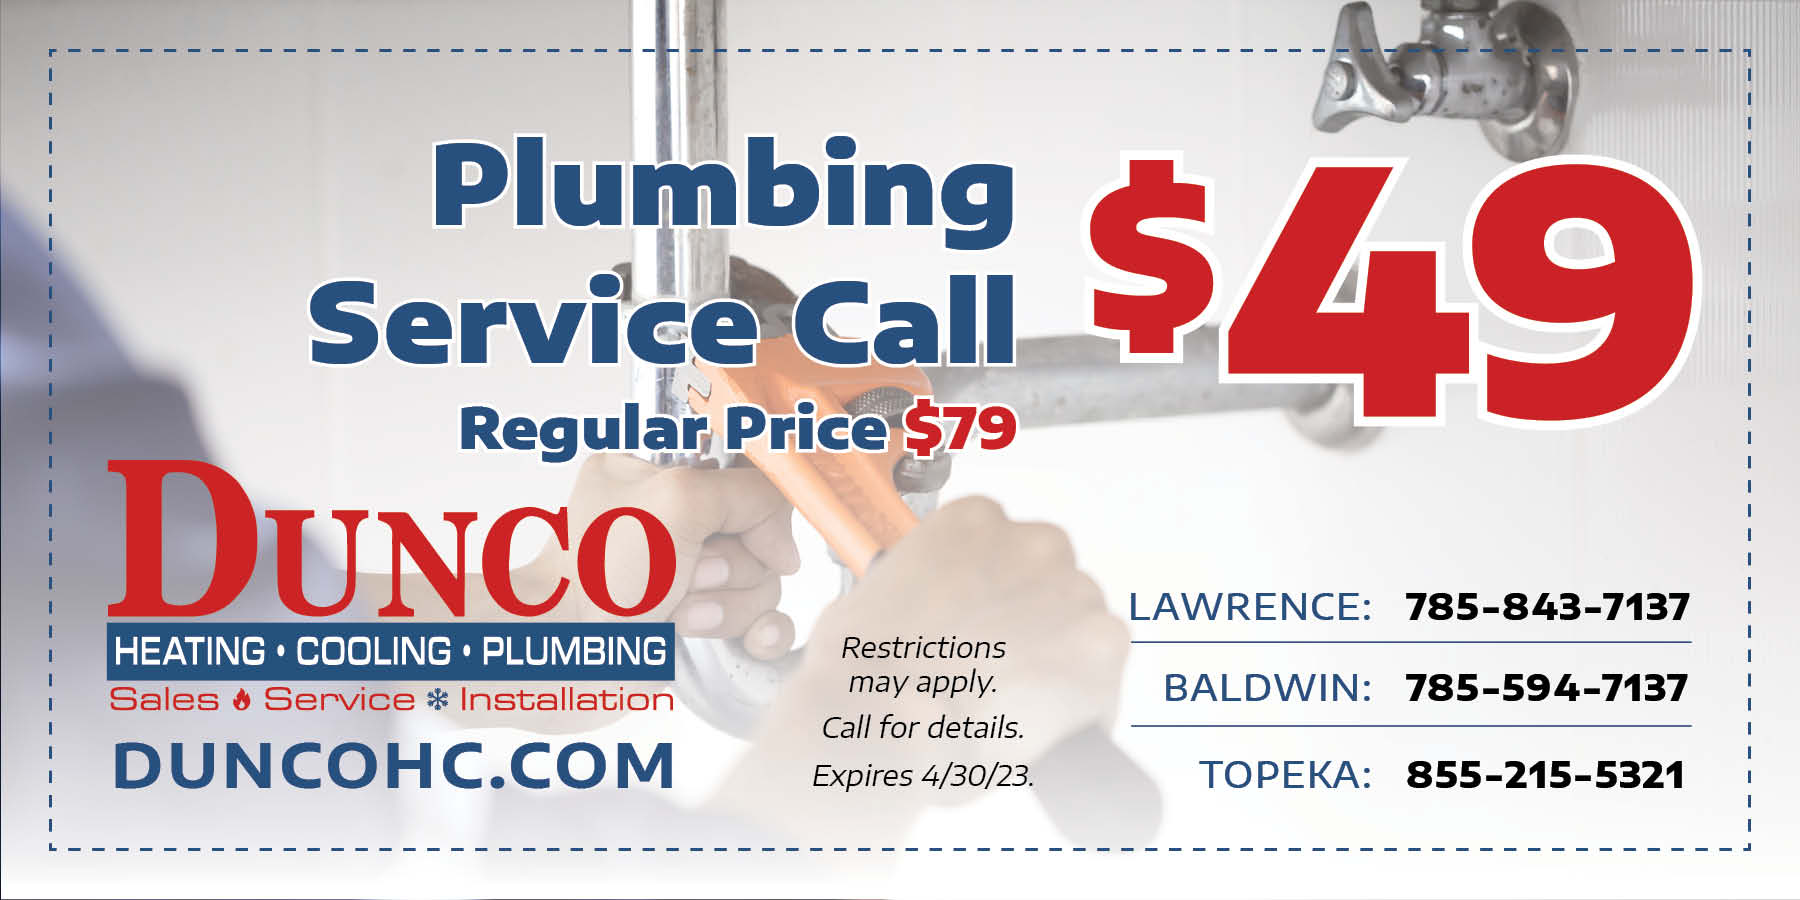 Special for a  Plumbing service call. Original Price . Offer expires April 30, 2023